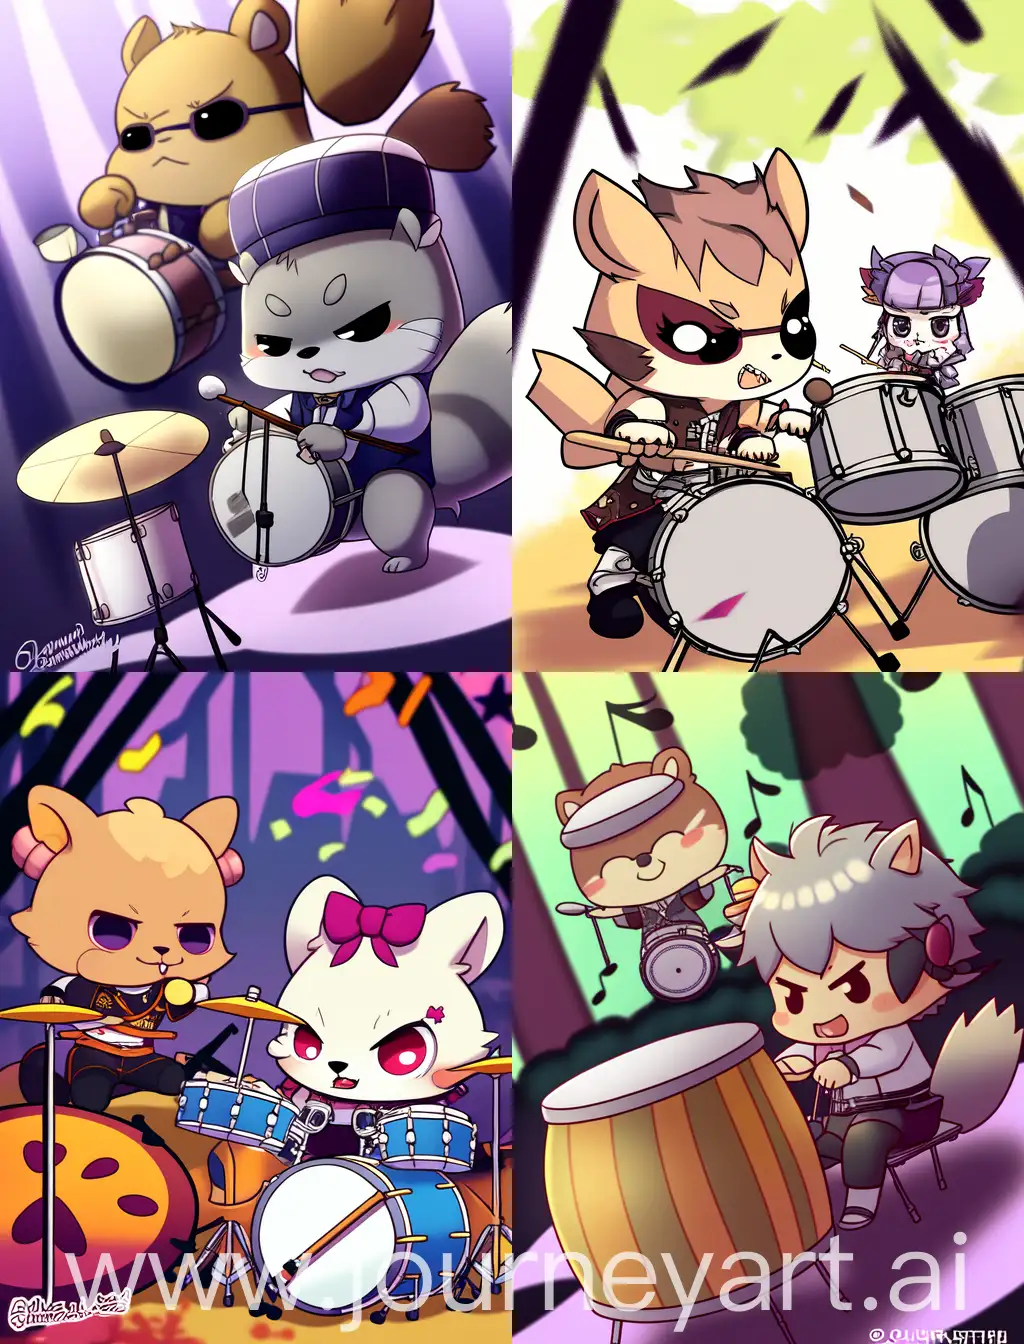 Chibi-Squirrel-and-Anime-Guy-Playing-Drums-in-Spooky-Atmosphere